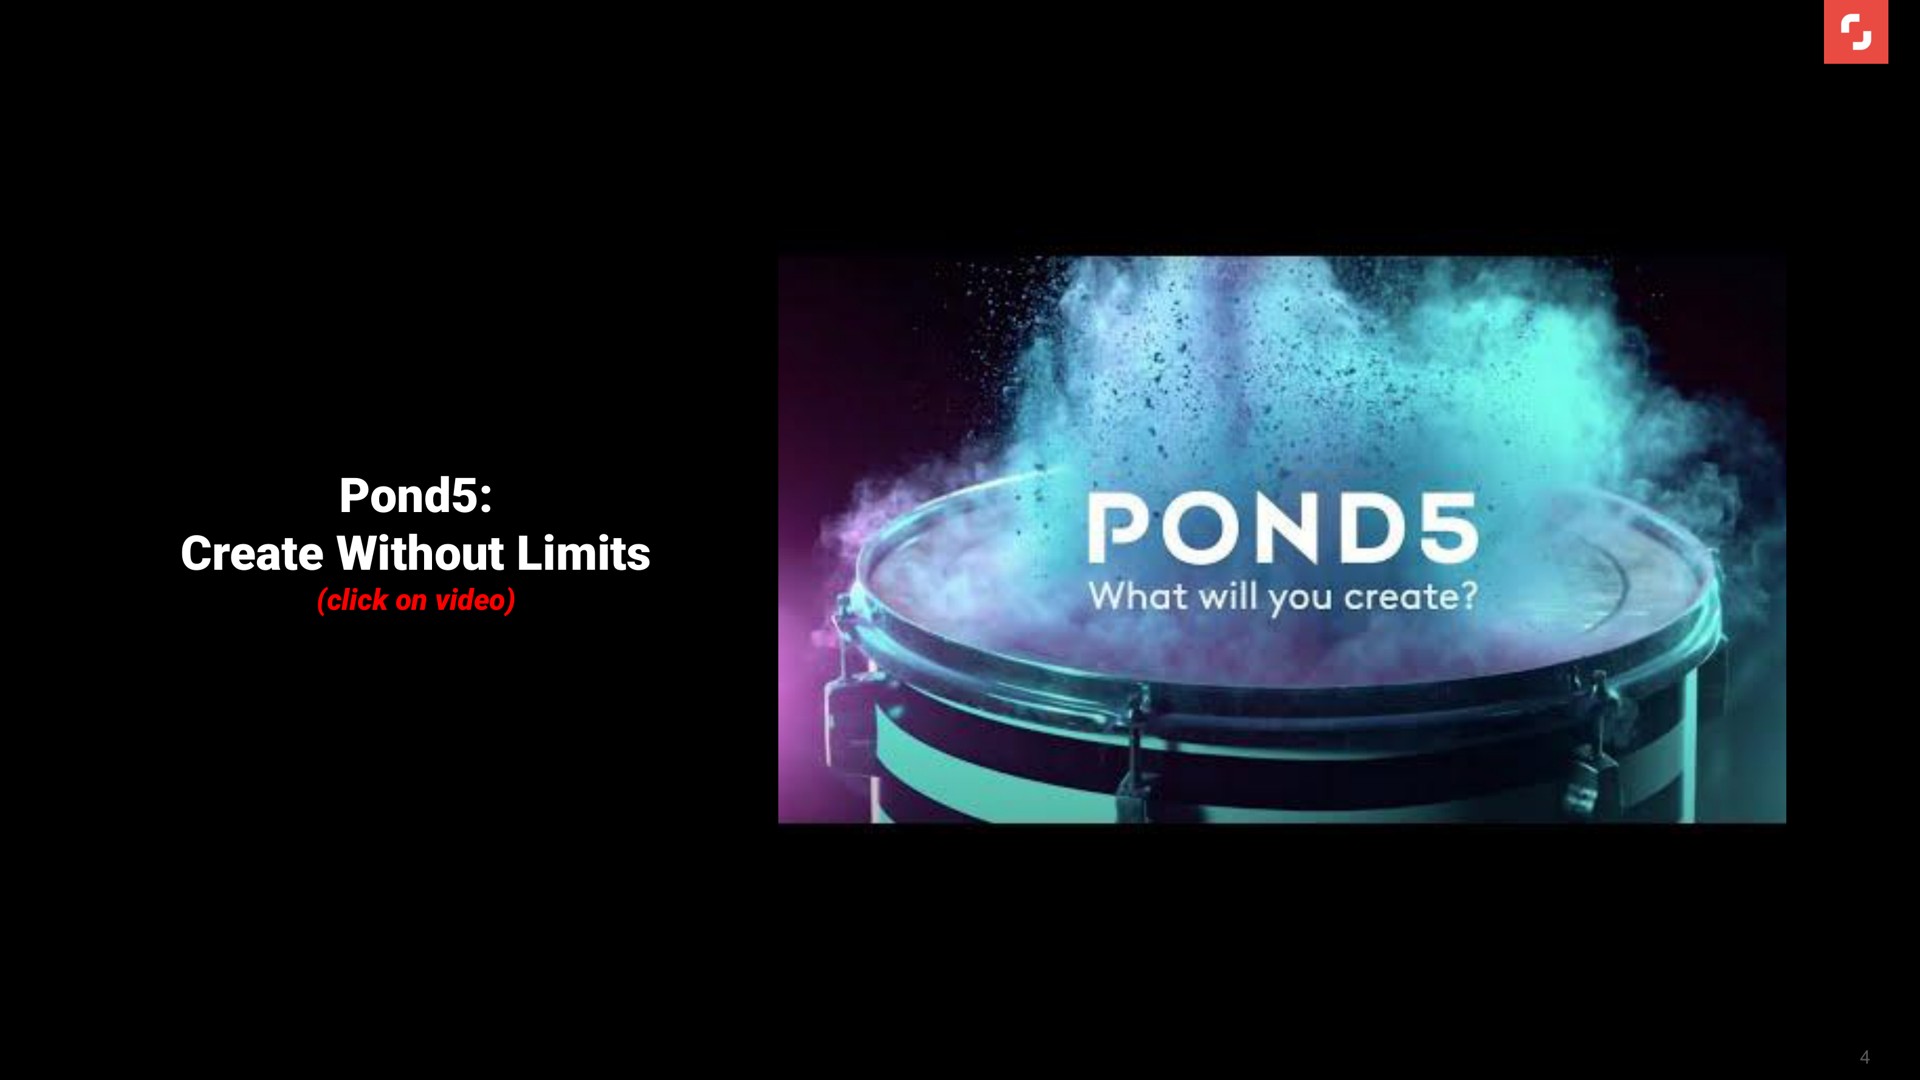 pond create without limits a res | Shutterstock